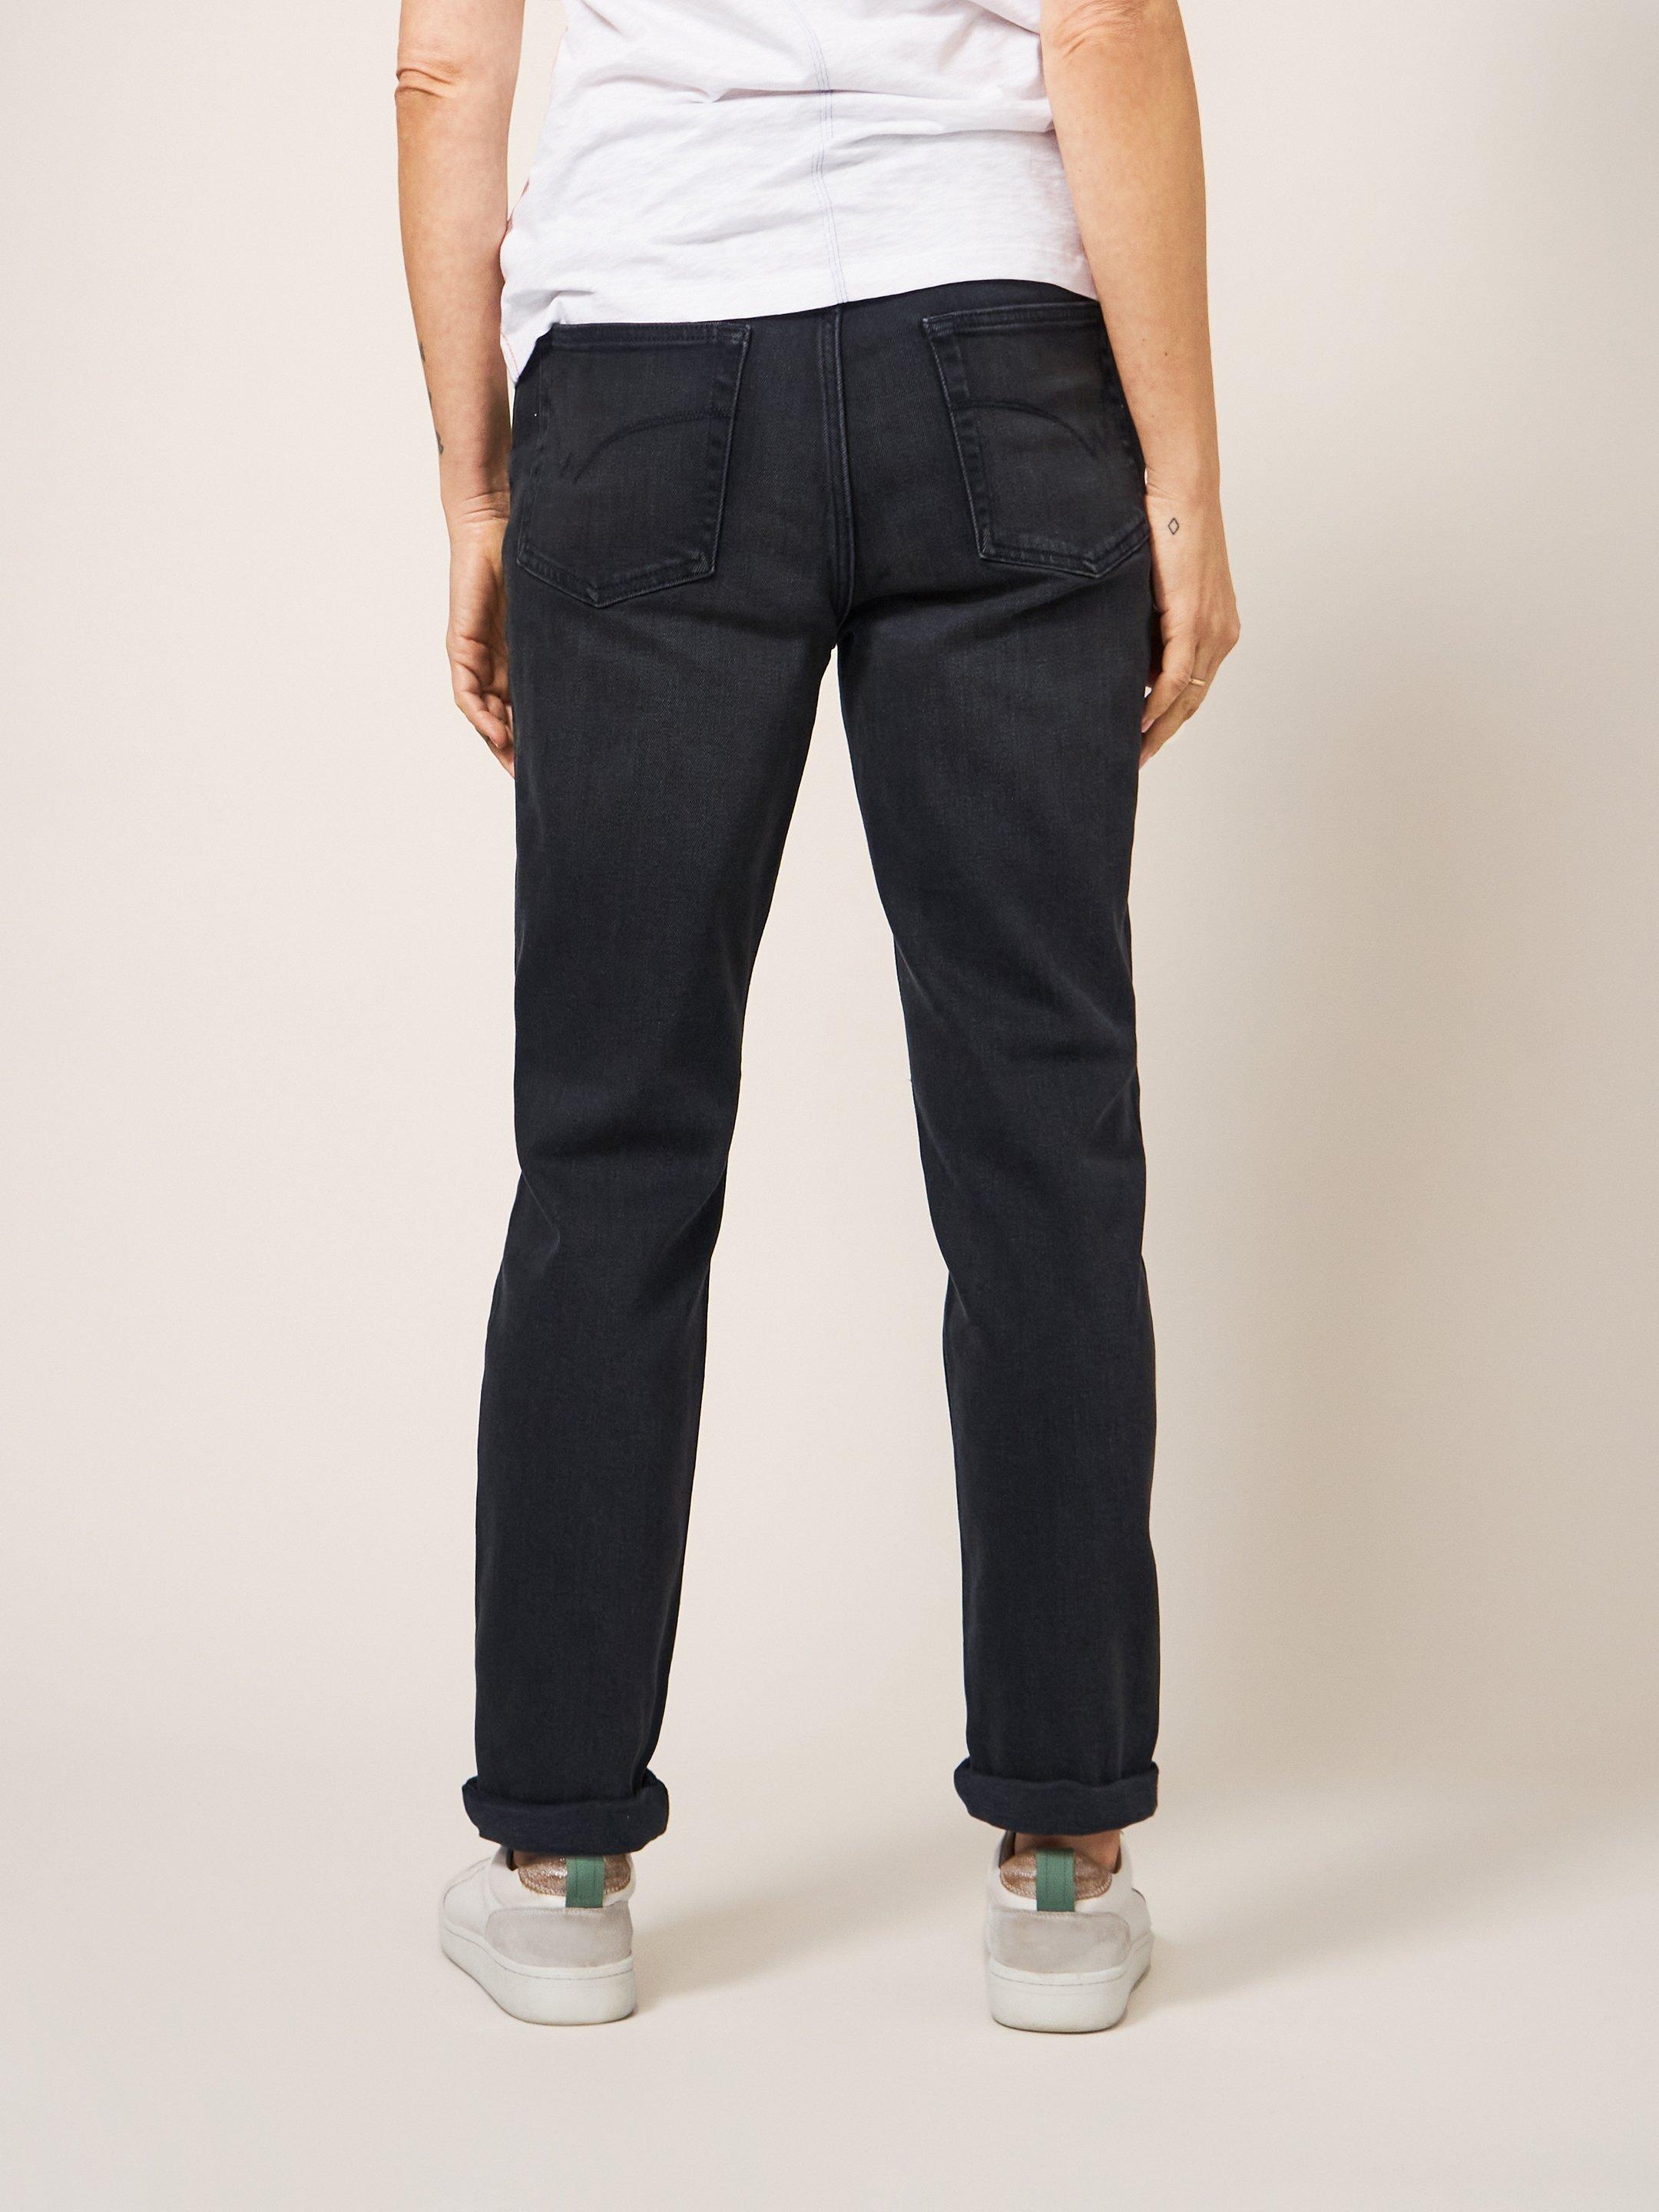 Katy Relaxed Slim Jeans in WASHED BLK - MODEL BACK